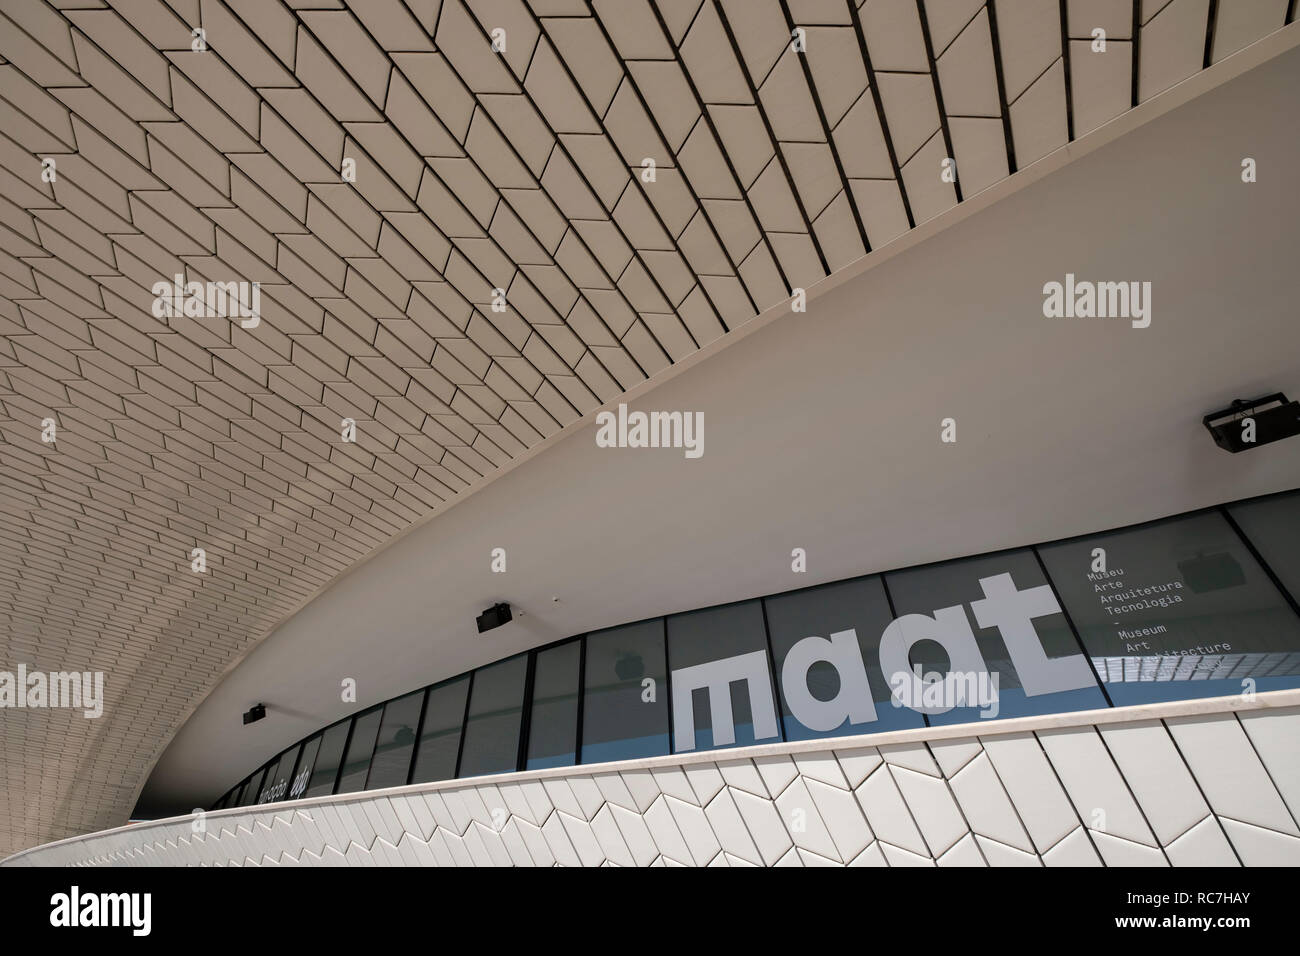 MAAT Museum of Art, Architecture and Technology by architect Amanda Levent, Lisbon, Portugal, Europe Stock Photo